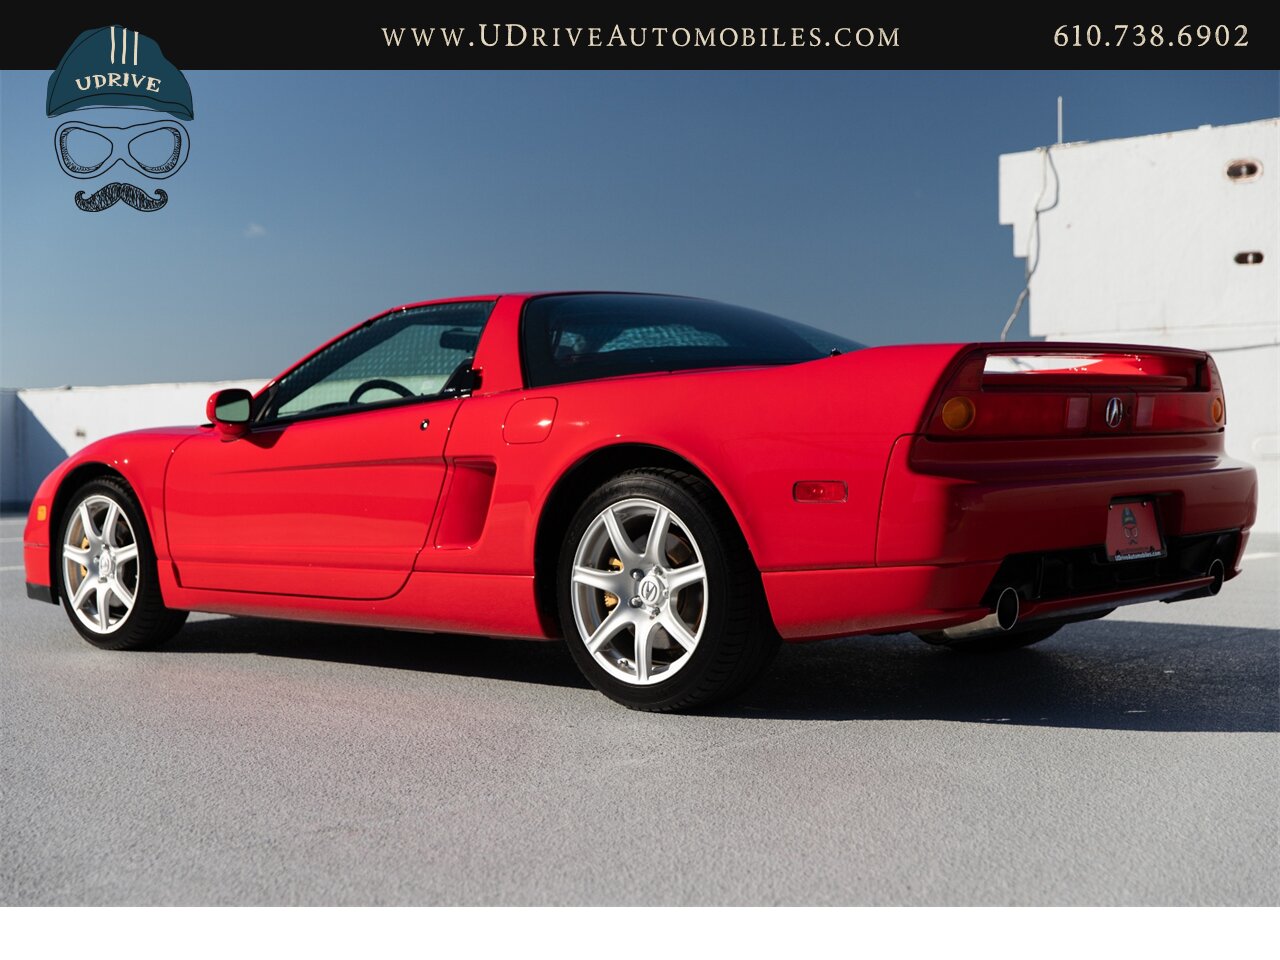 2004 Acura NSX NSX-T 21k mIles Red over Black  Fresh Timing Belt Service - Photo 22 - West Chester, PA 19382